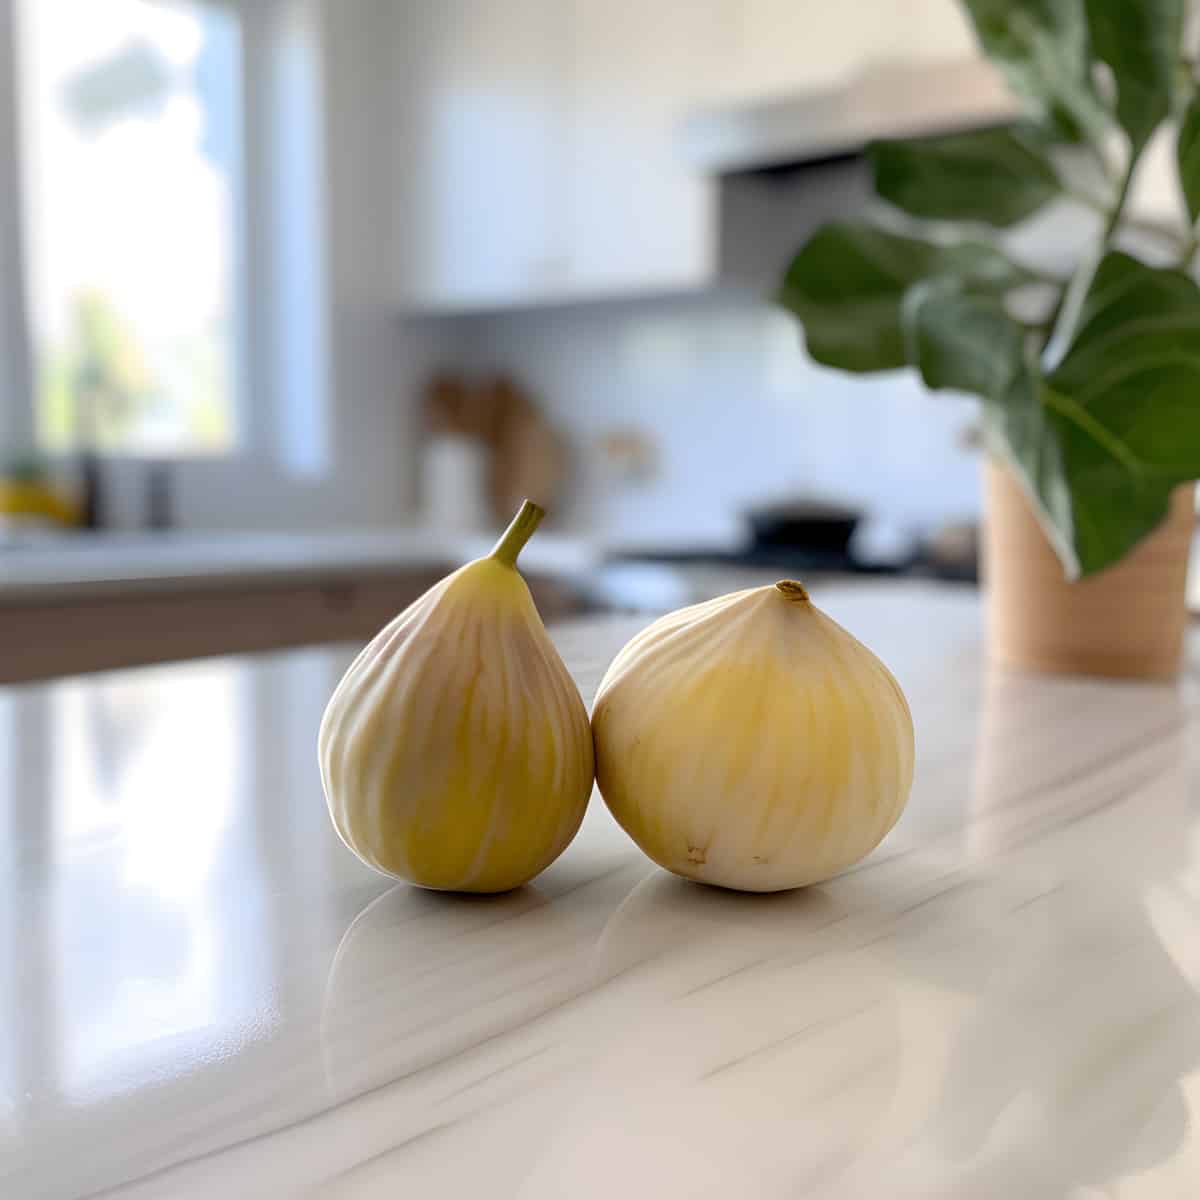 White Fig Fruit on a kitchen counter